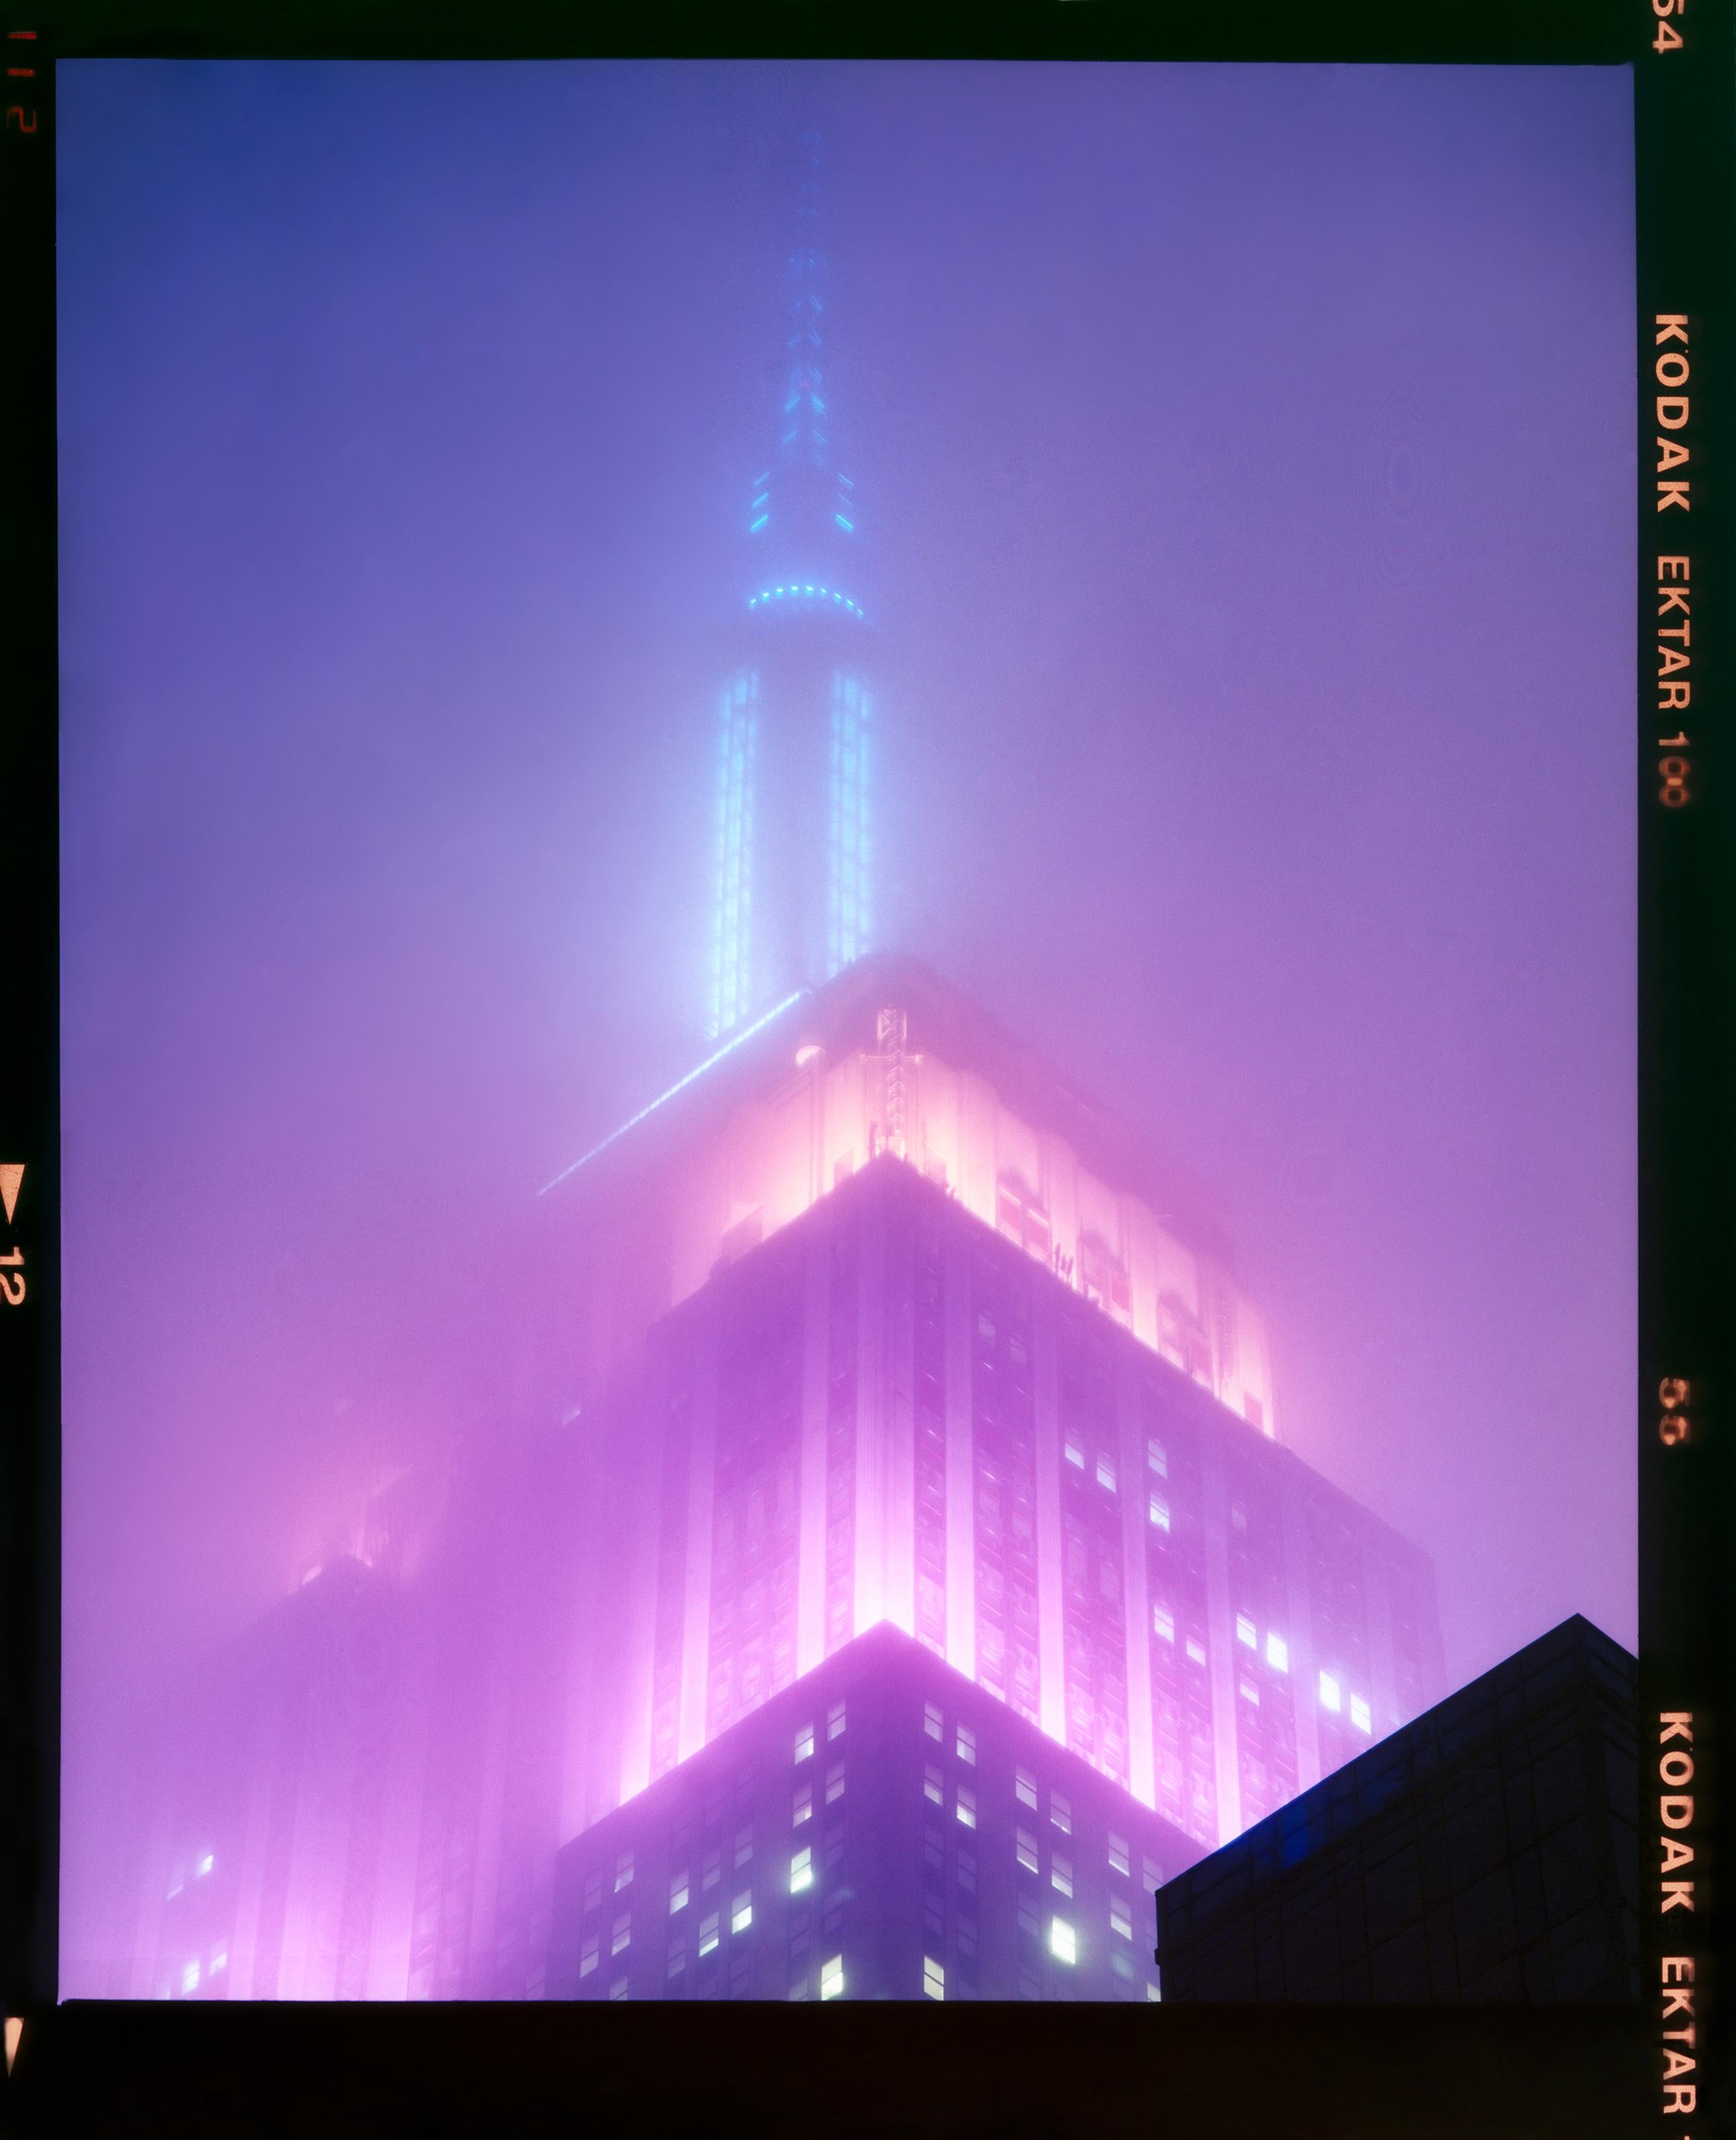 Richard Heeps Print - NOMAD VIII (Film Rebate), New York - Conceptual Architectural Color Photography